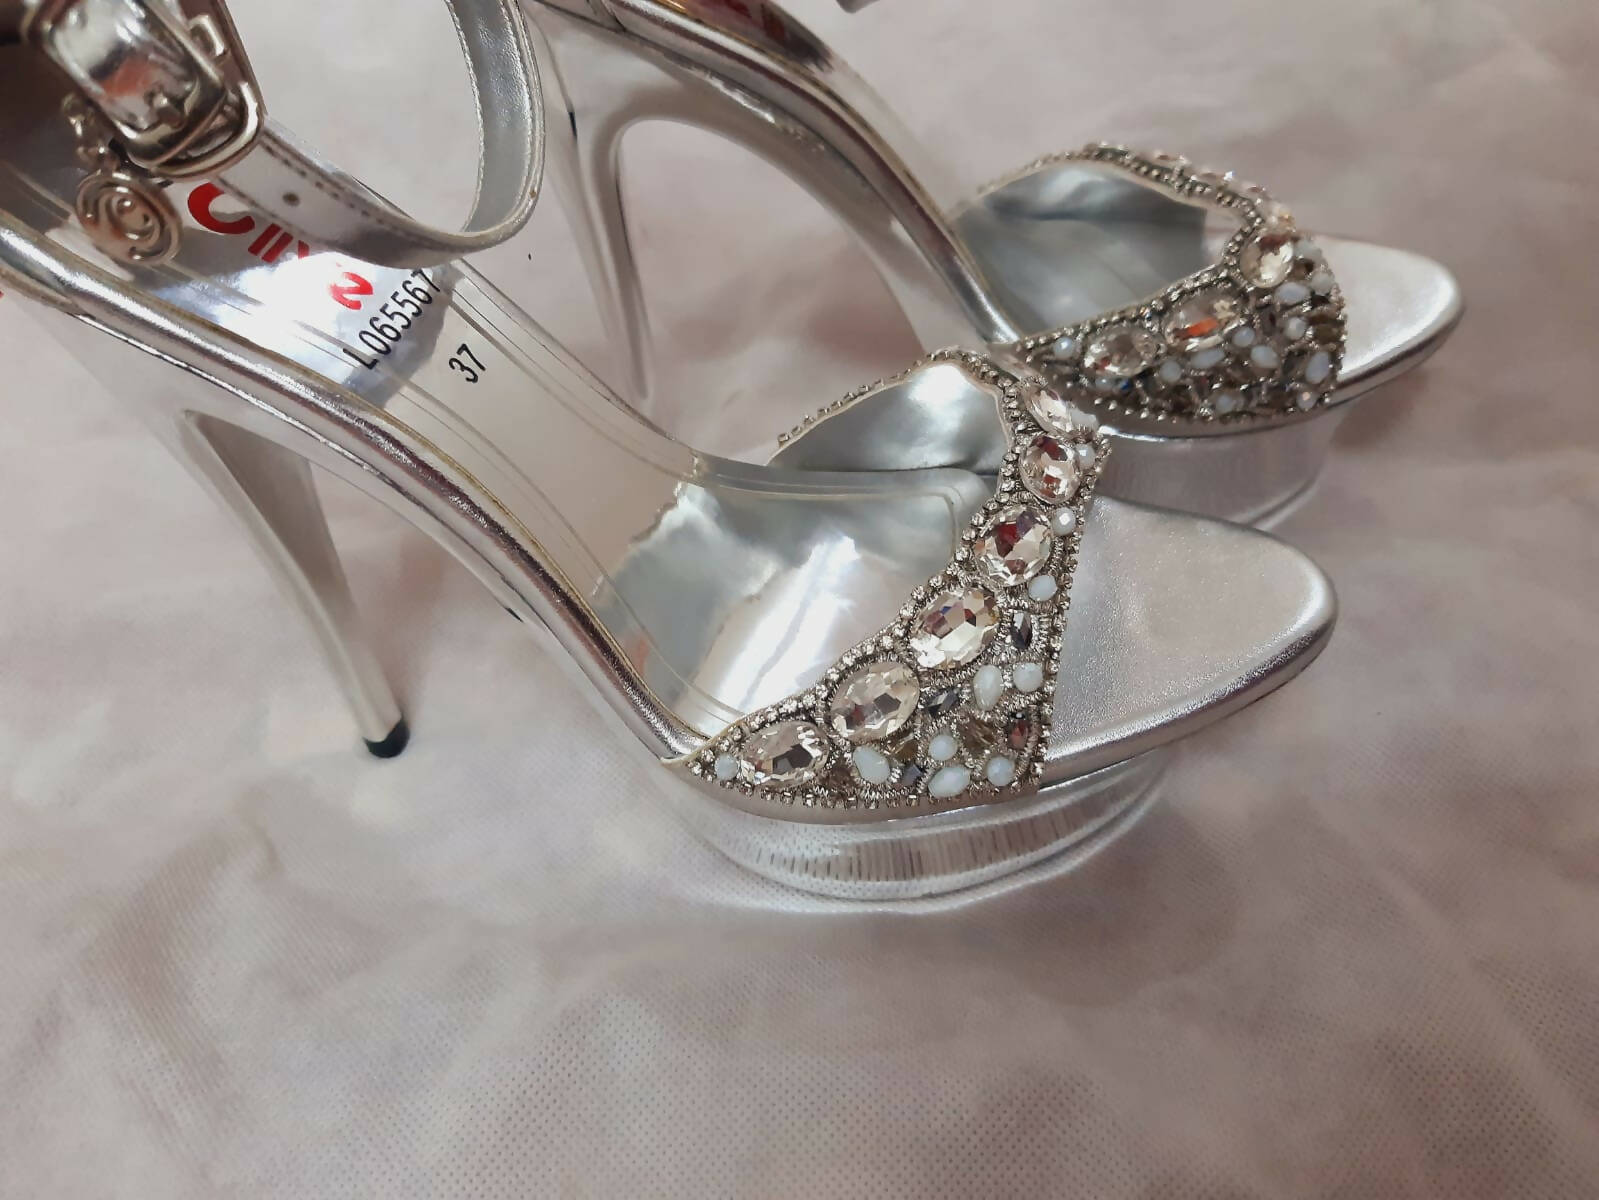 Image | Bridal heels shoes (Size: 37) Women Shoes | Worn Once